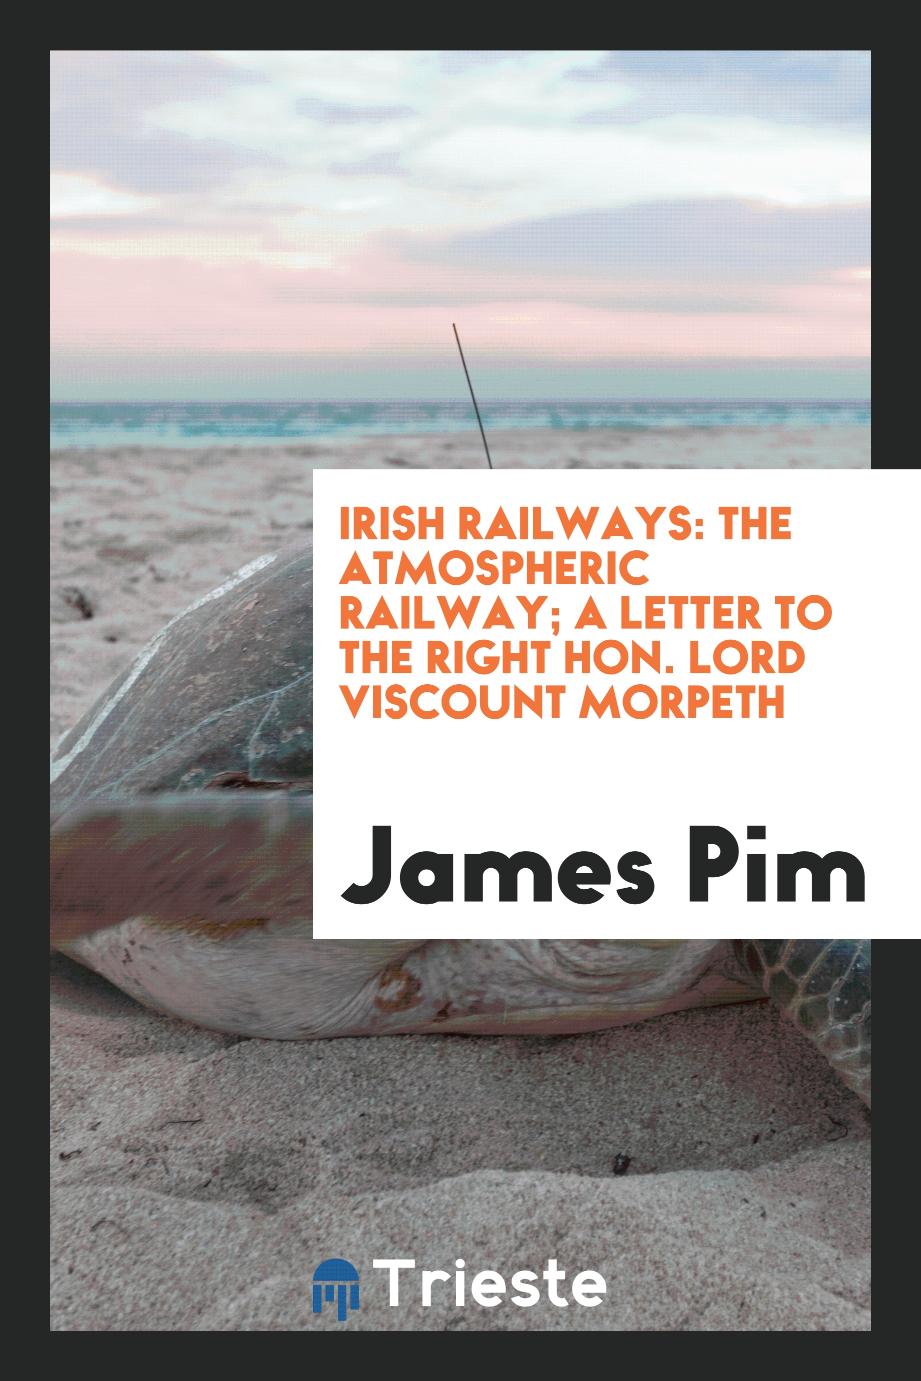 Irish Railways: The Atmospheric Railway; A Letter to the Right Hon. Lord Viscount Morpeth